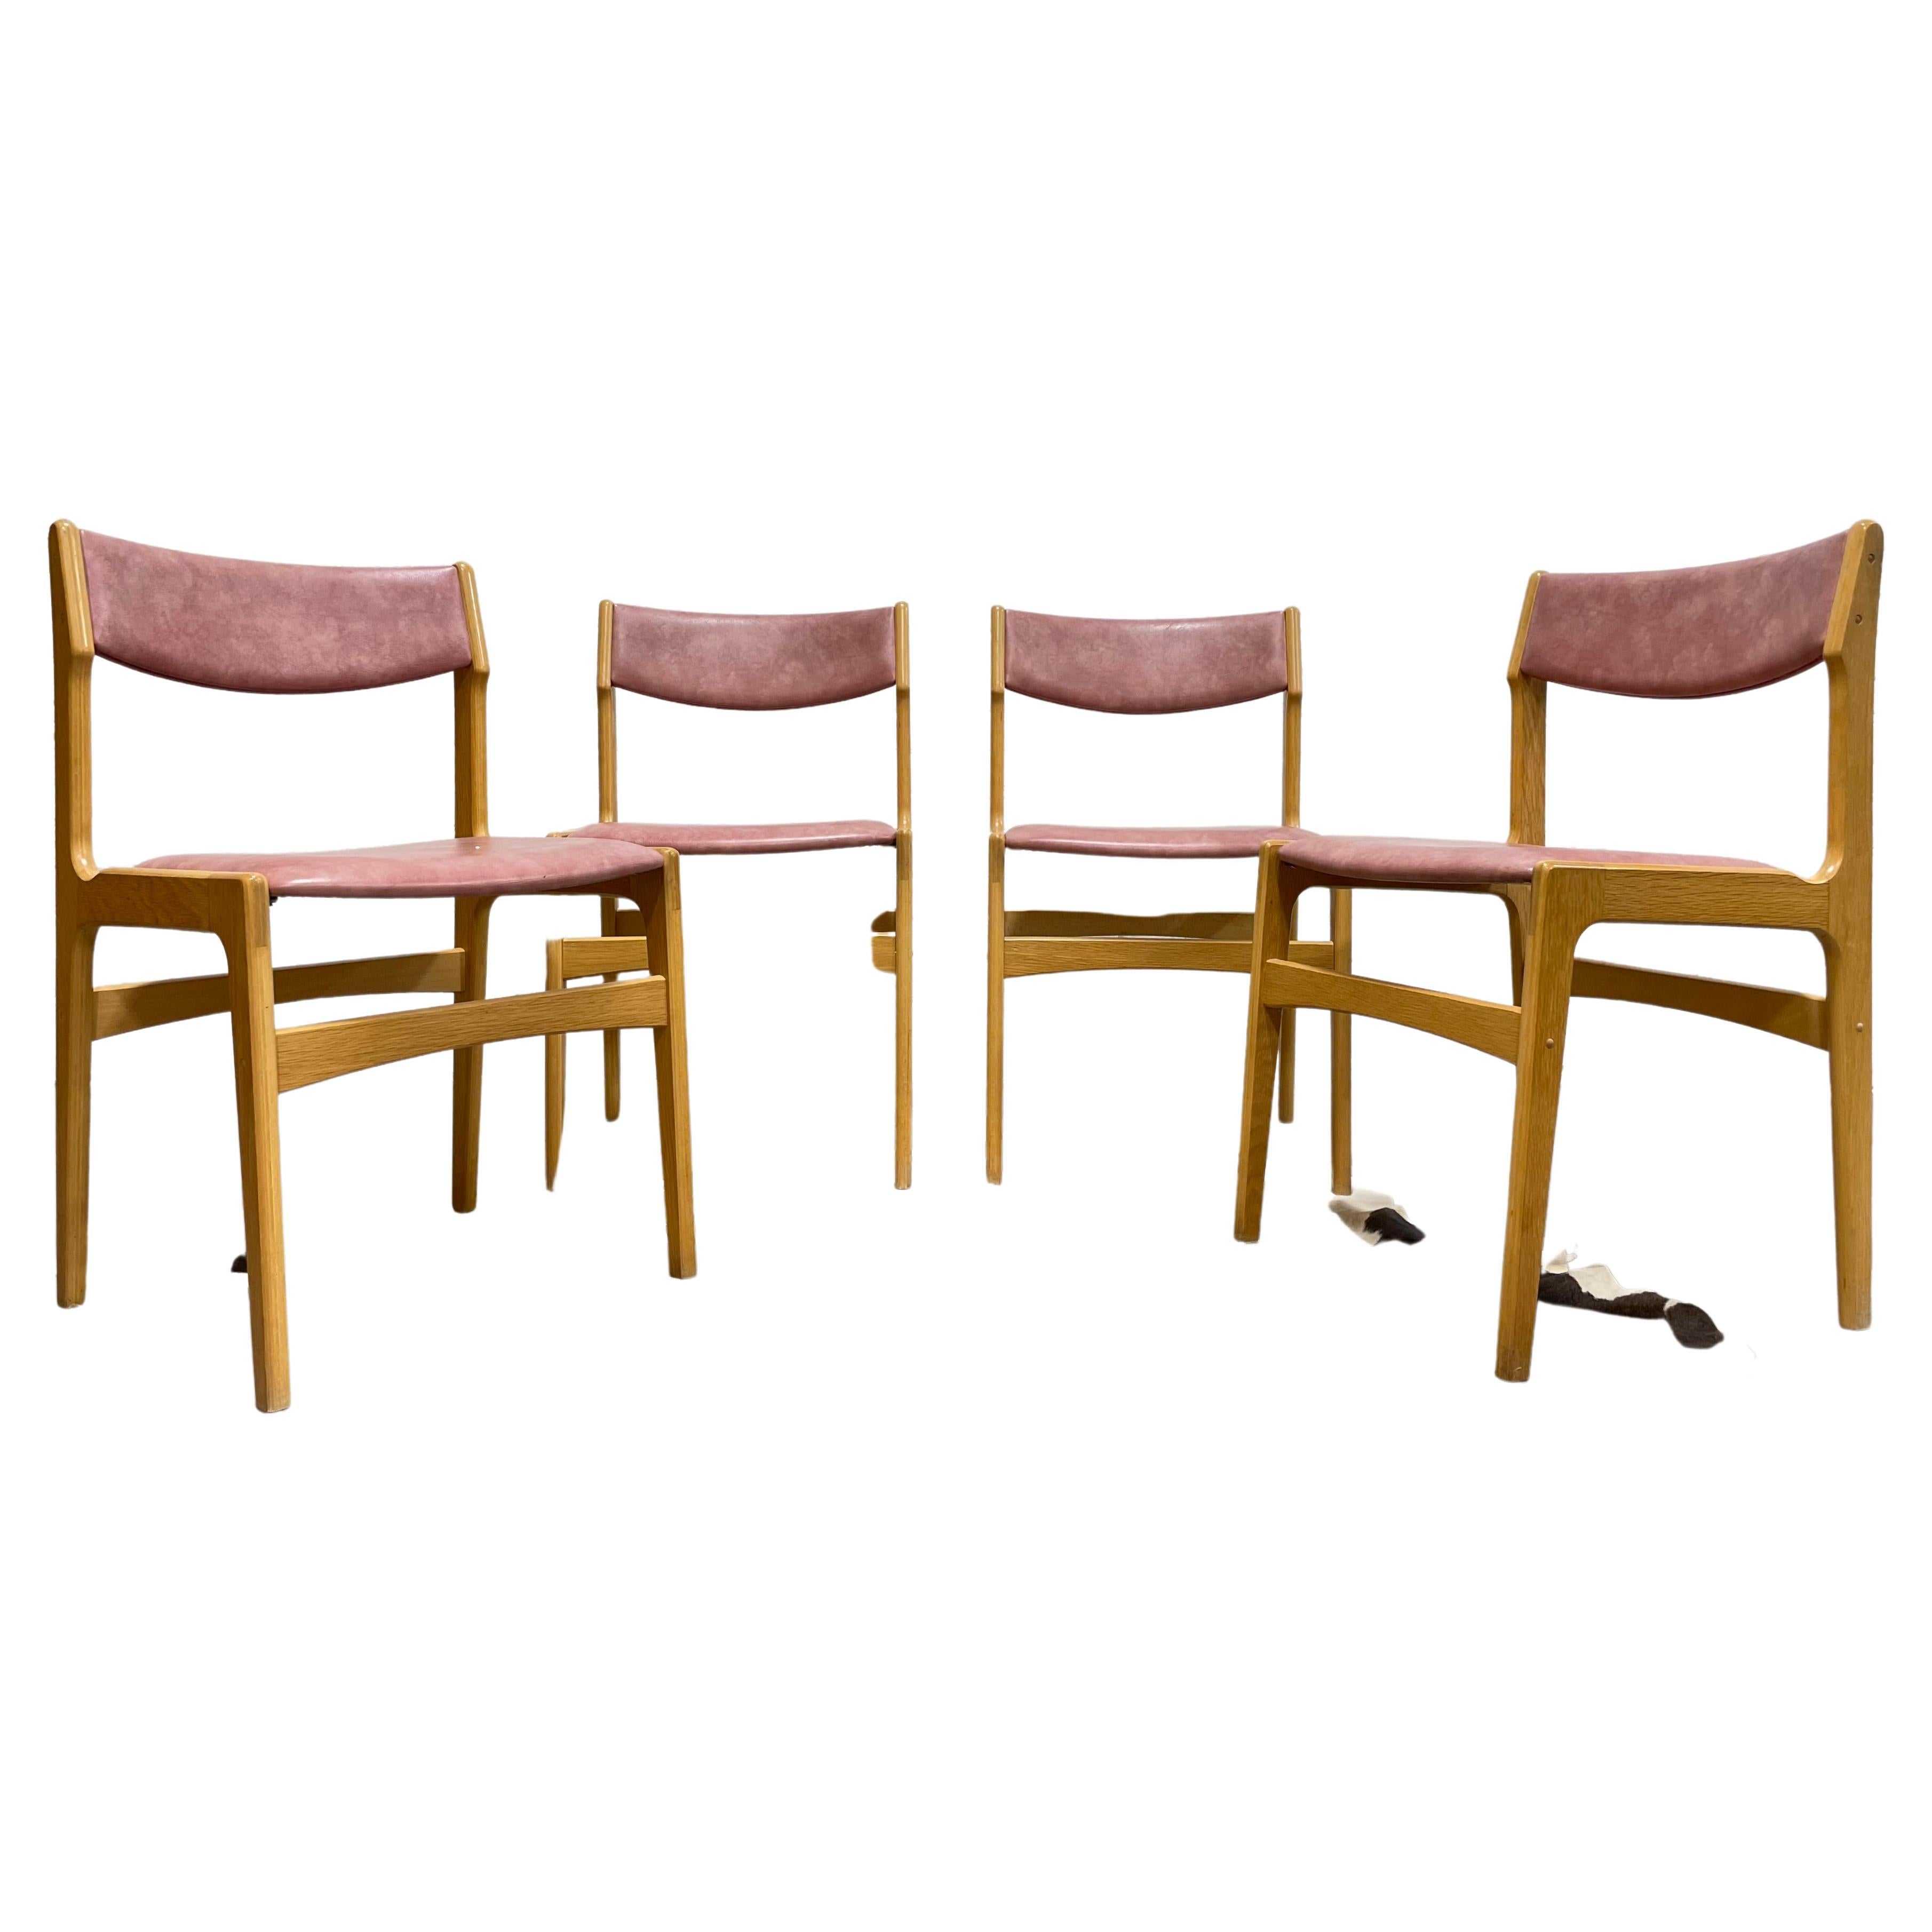 Set of four Oak Mid Century Modern Dining Chairs with Pink naugahyde upholstery. Beautifully sculpted, these super comfortable chairs feature an organic design and glorious oak frames that have been freshly cleaned and oiled and ready to be enjoyed